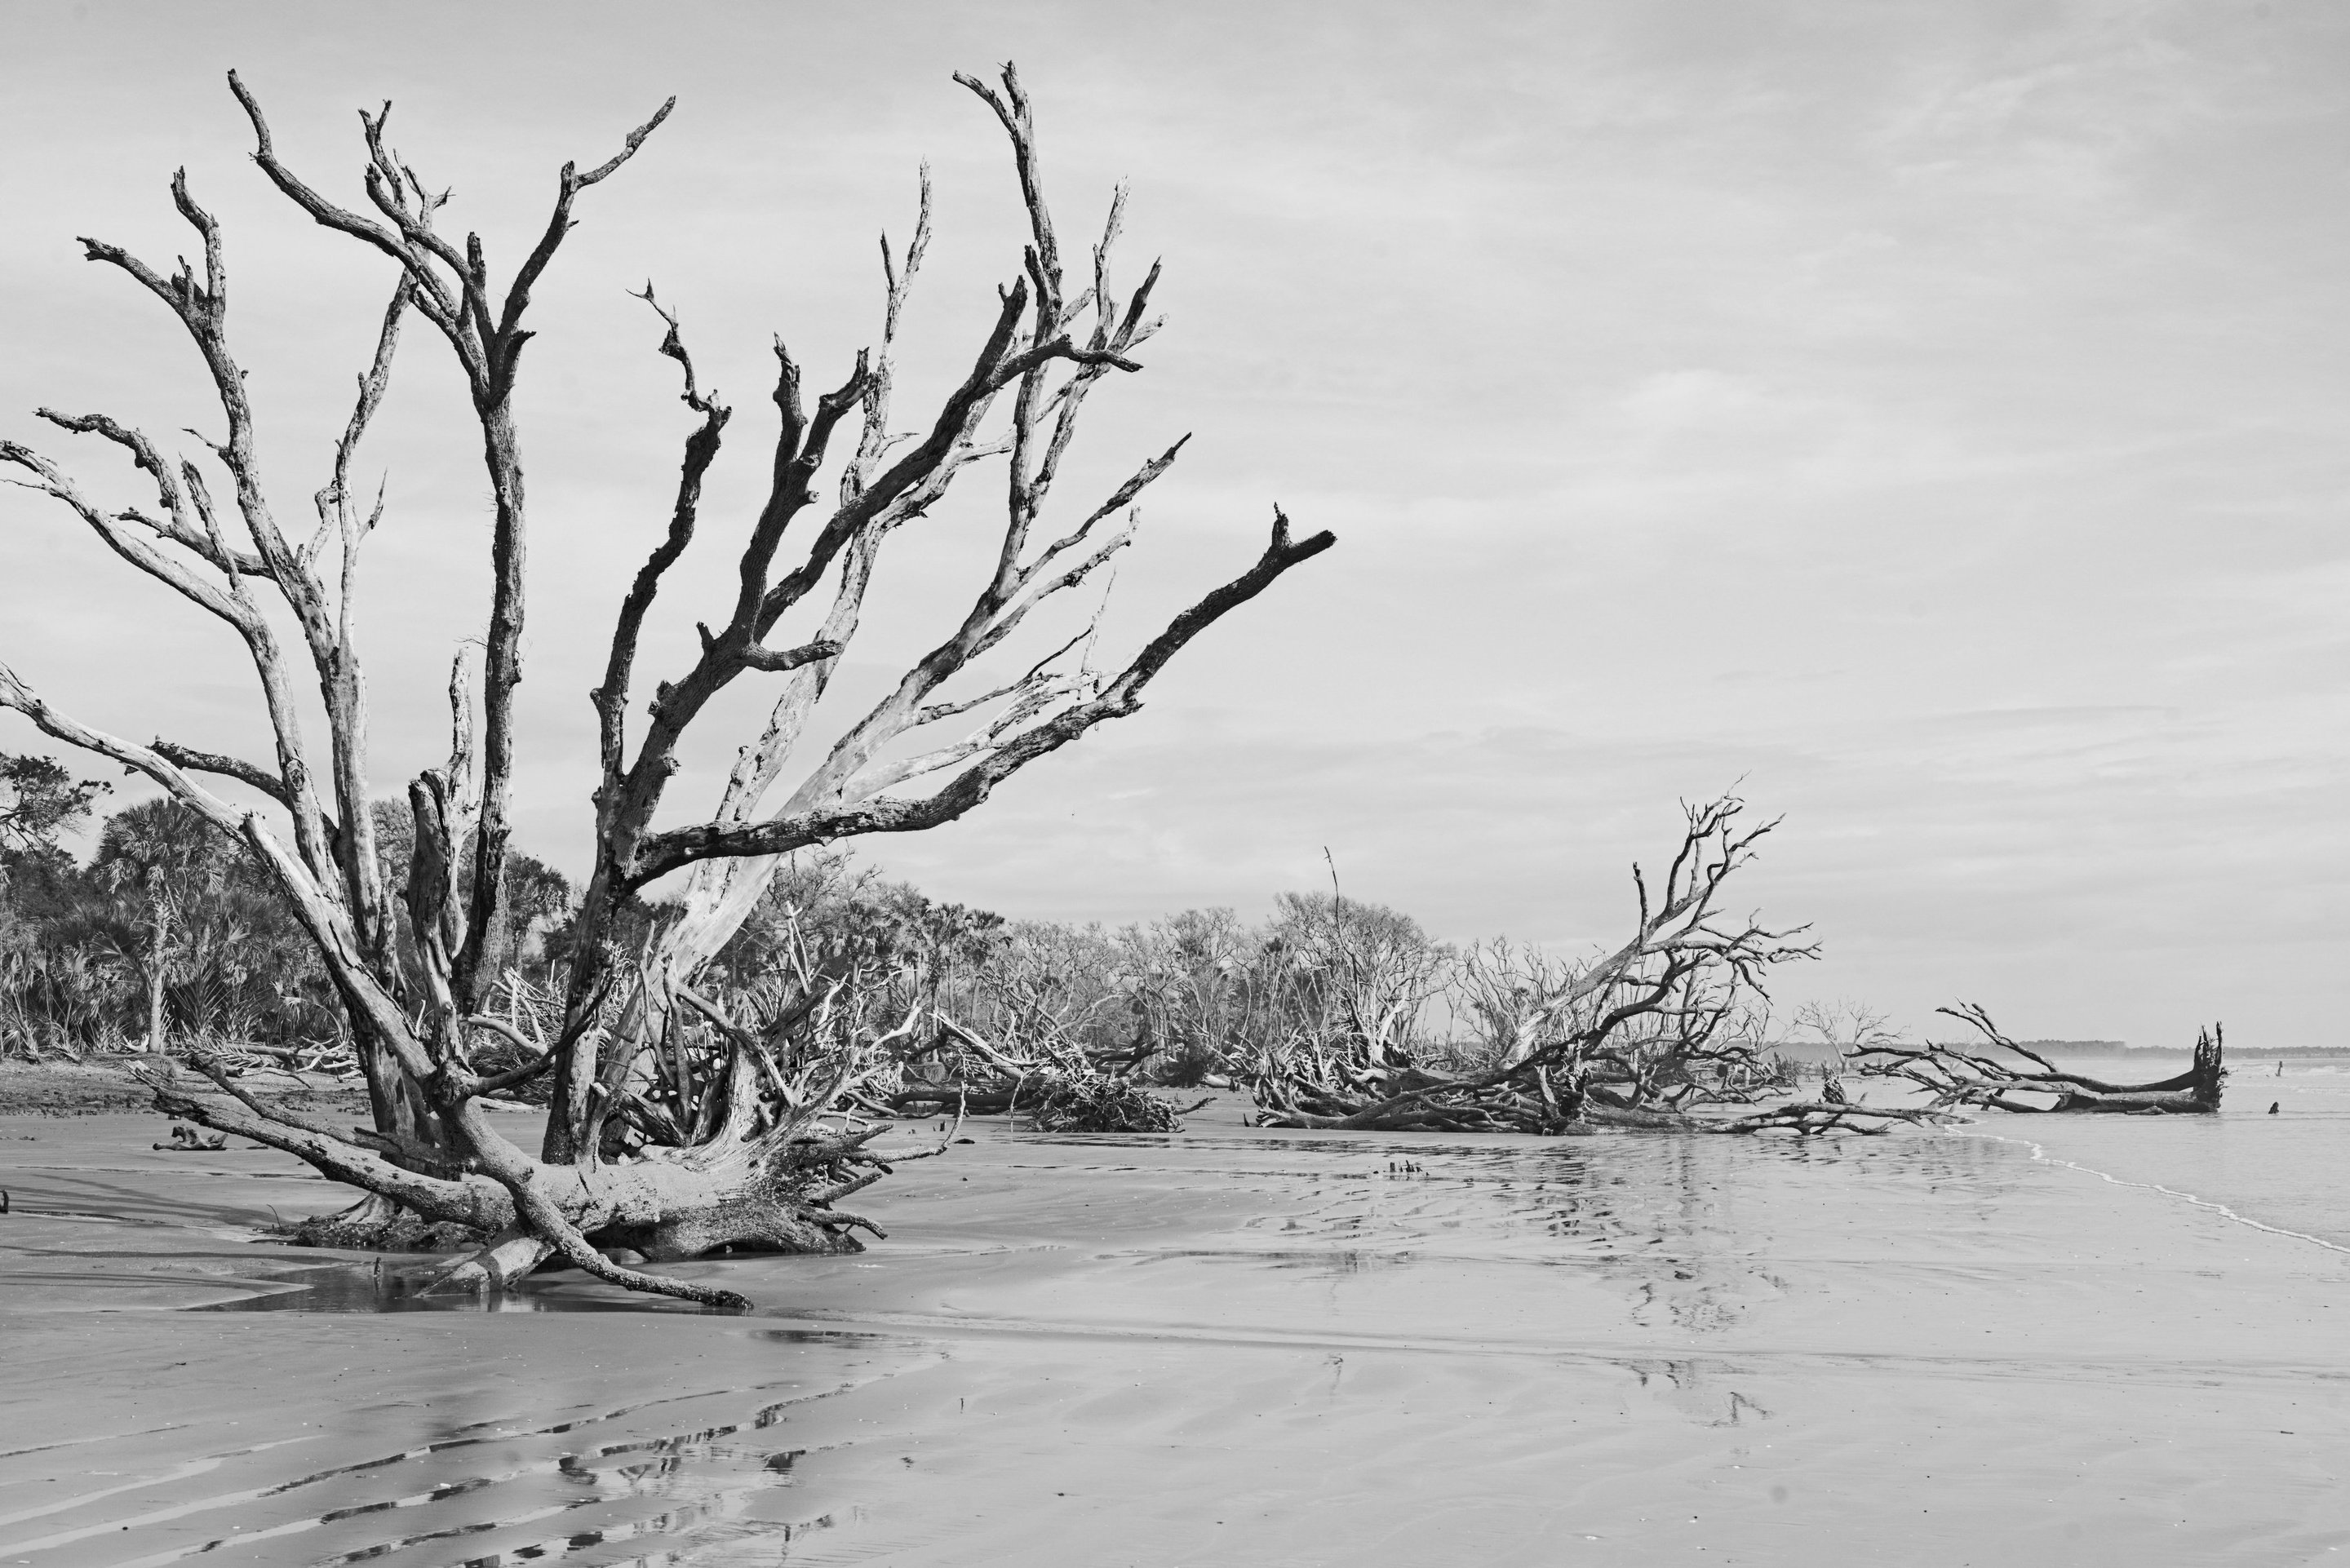 skeleton trees on the beach, botany bay photographed by luxagraf